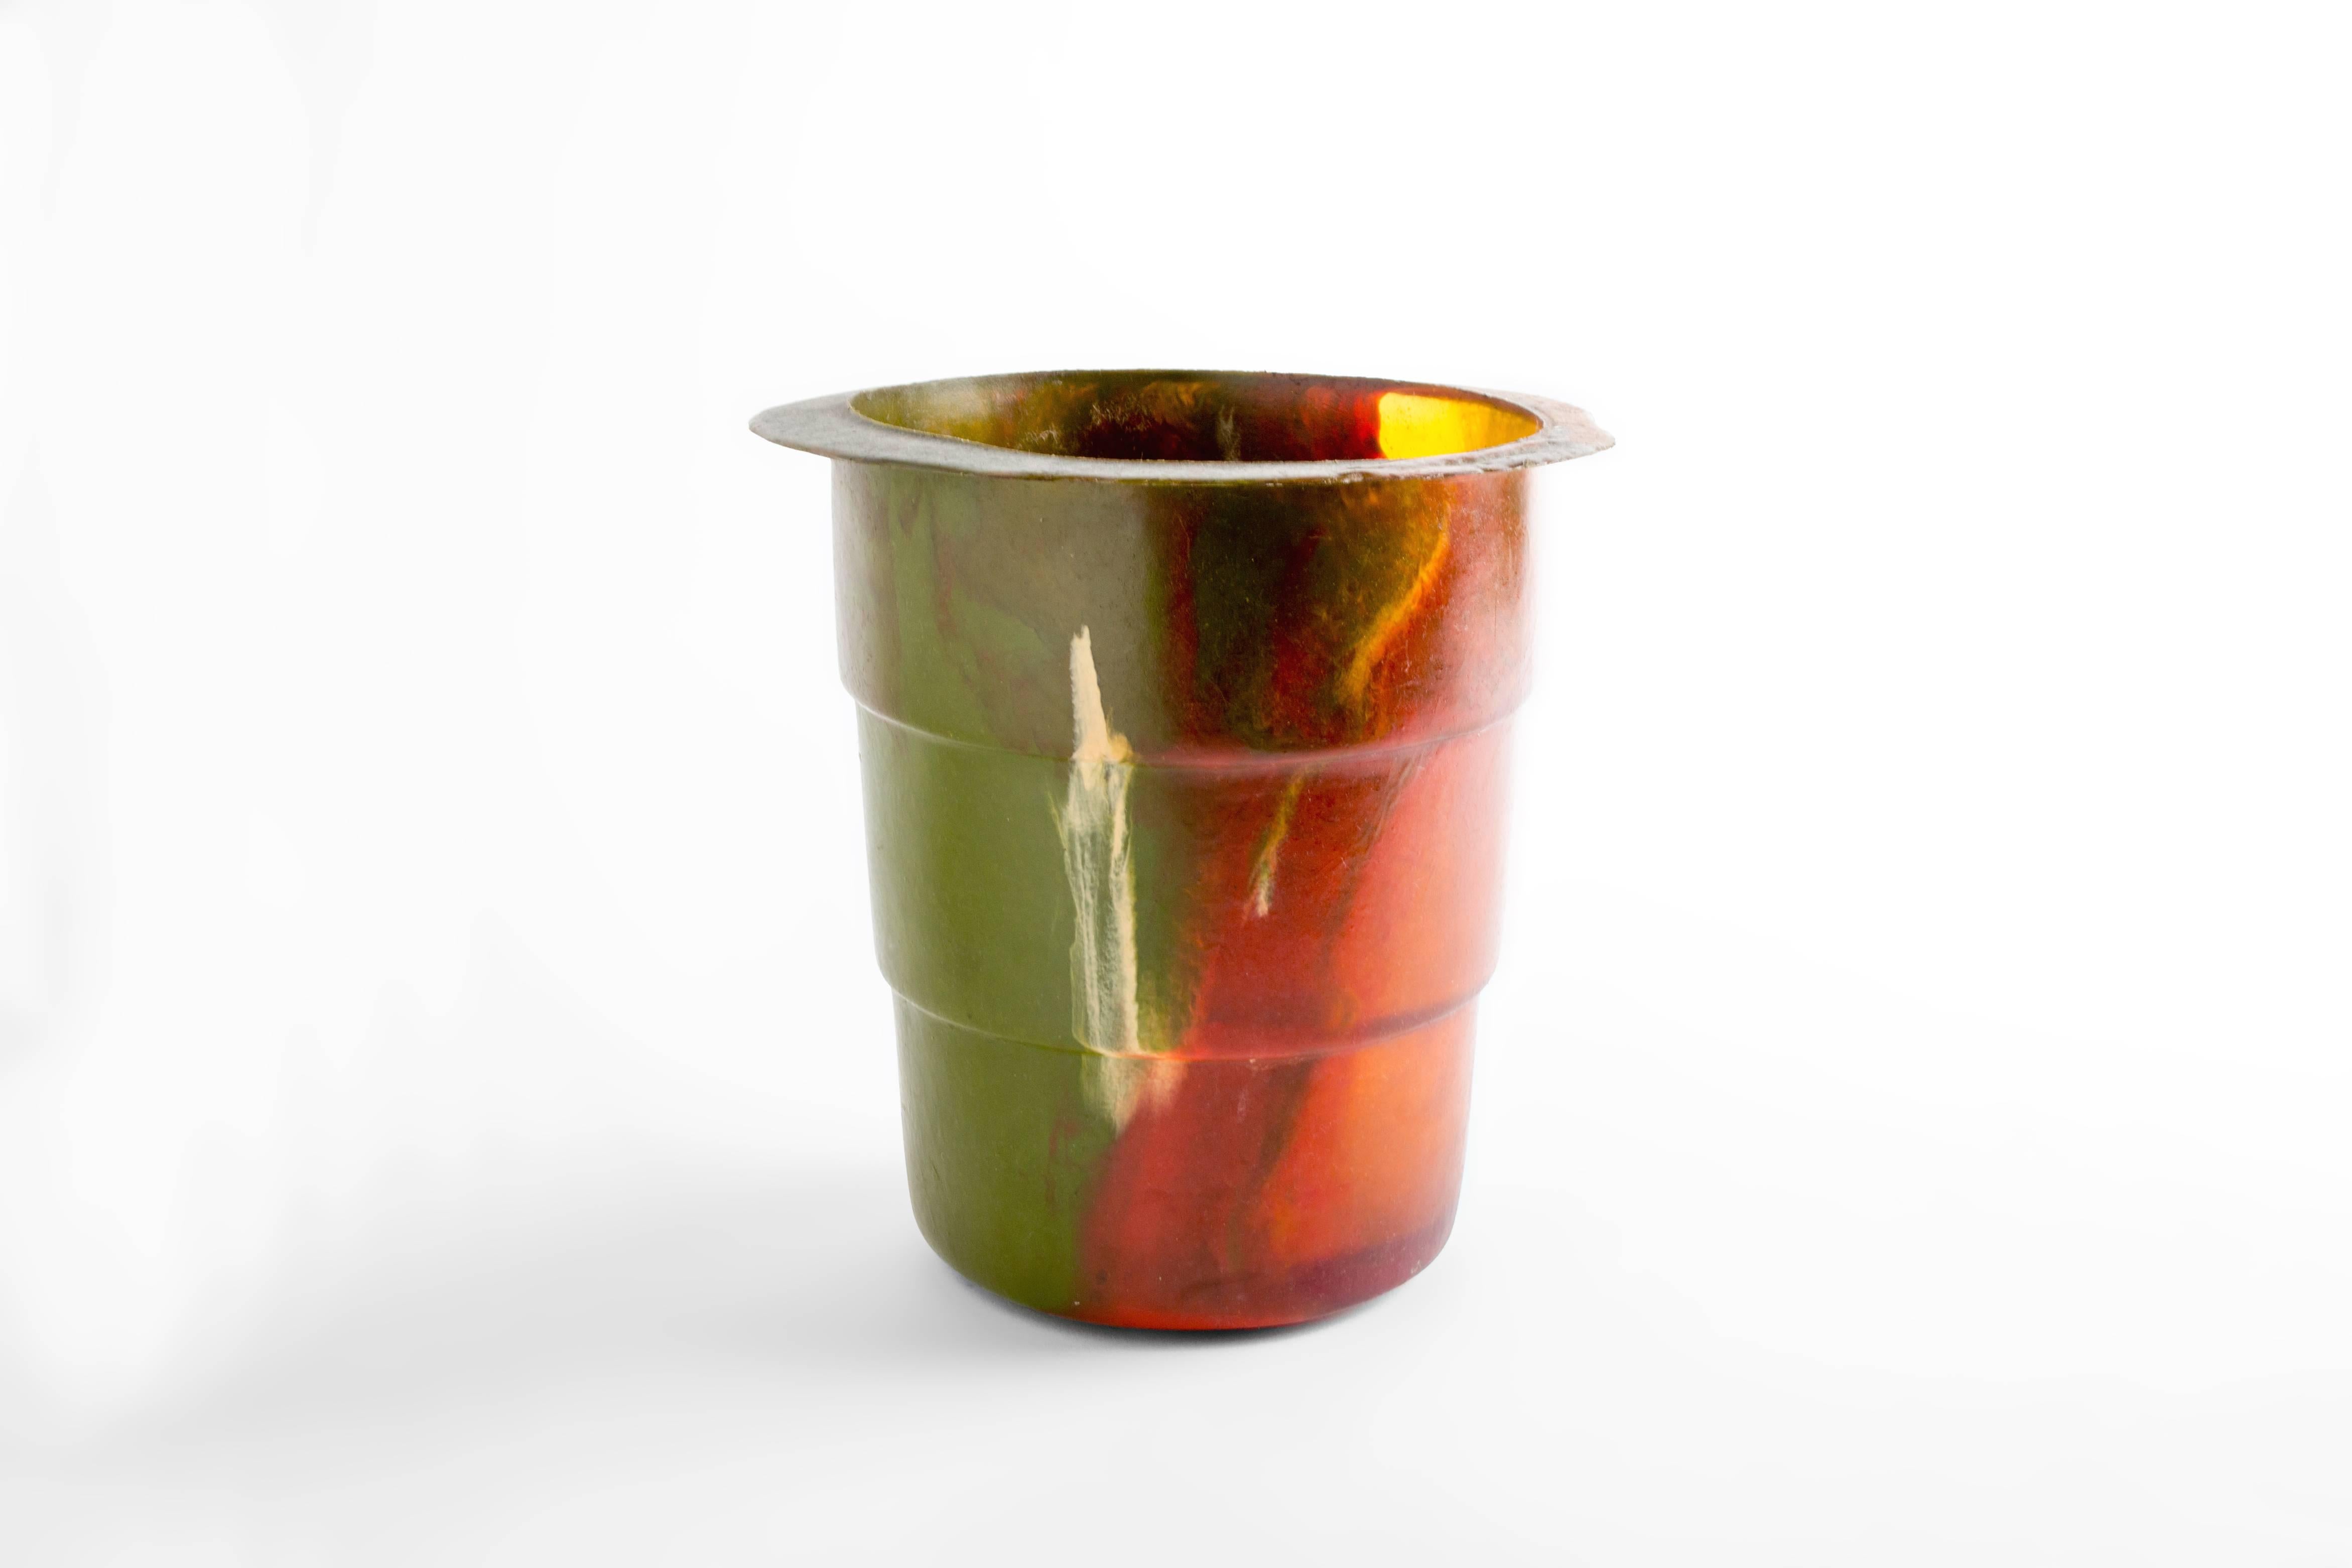 Multicolored resin bucket by Italian architect and leading figure in contemporary Industrial Design Gaetano Pesce. Born in La Spezia, Italy in 1939, Pesce has spent his career as an architect, urban planner and Industrial designer. His use of color